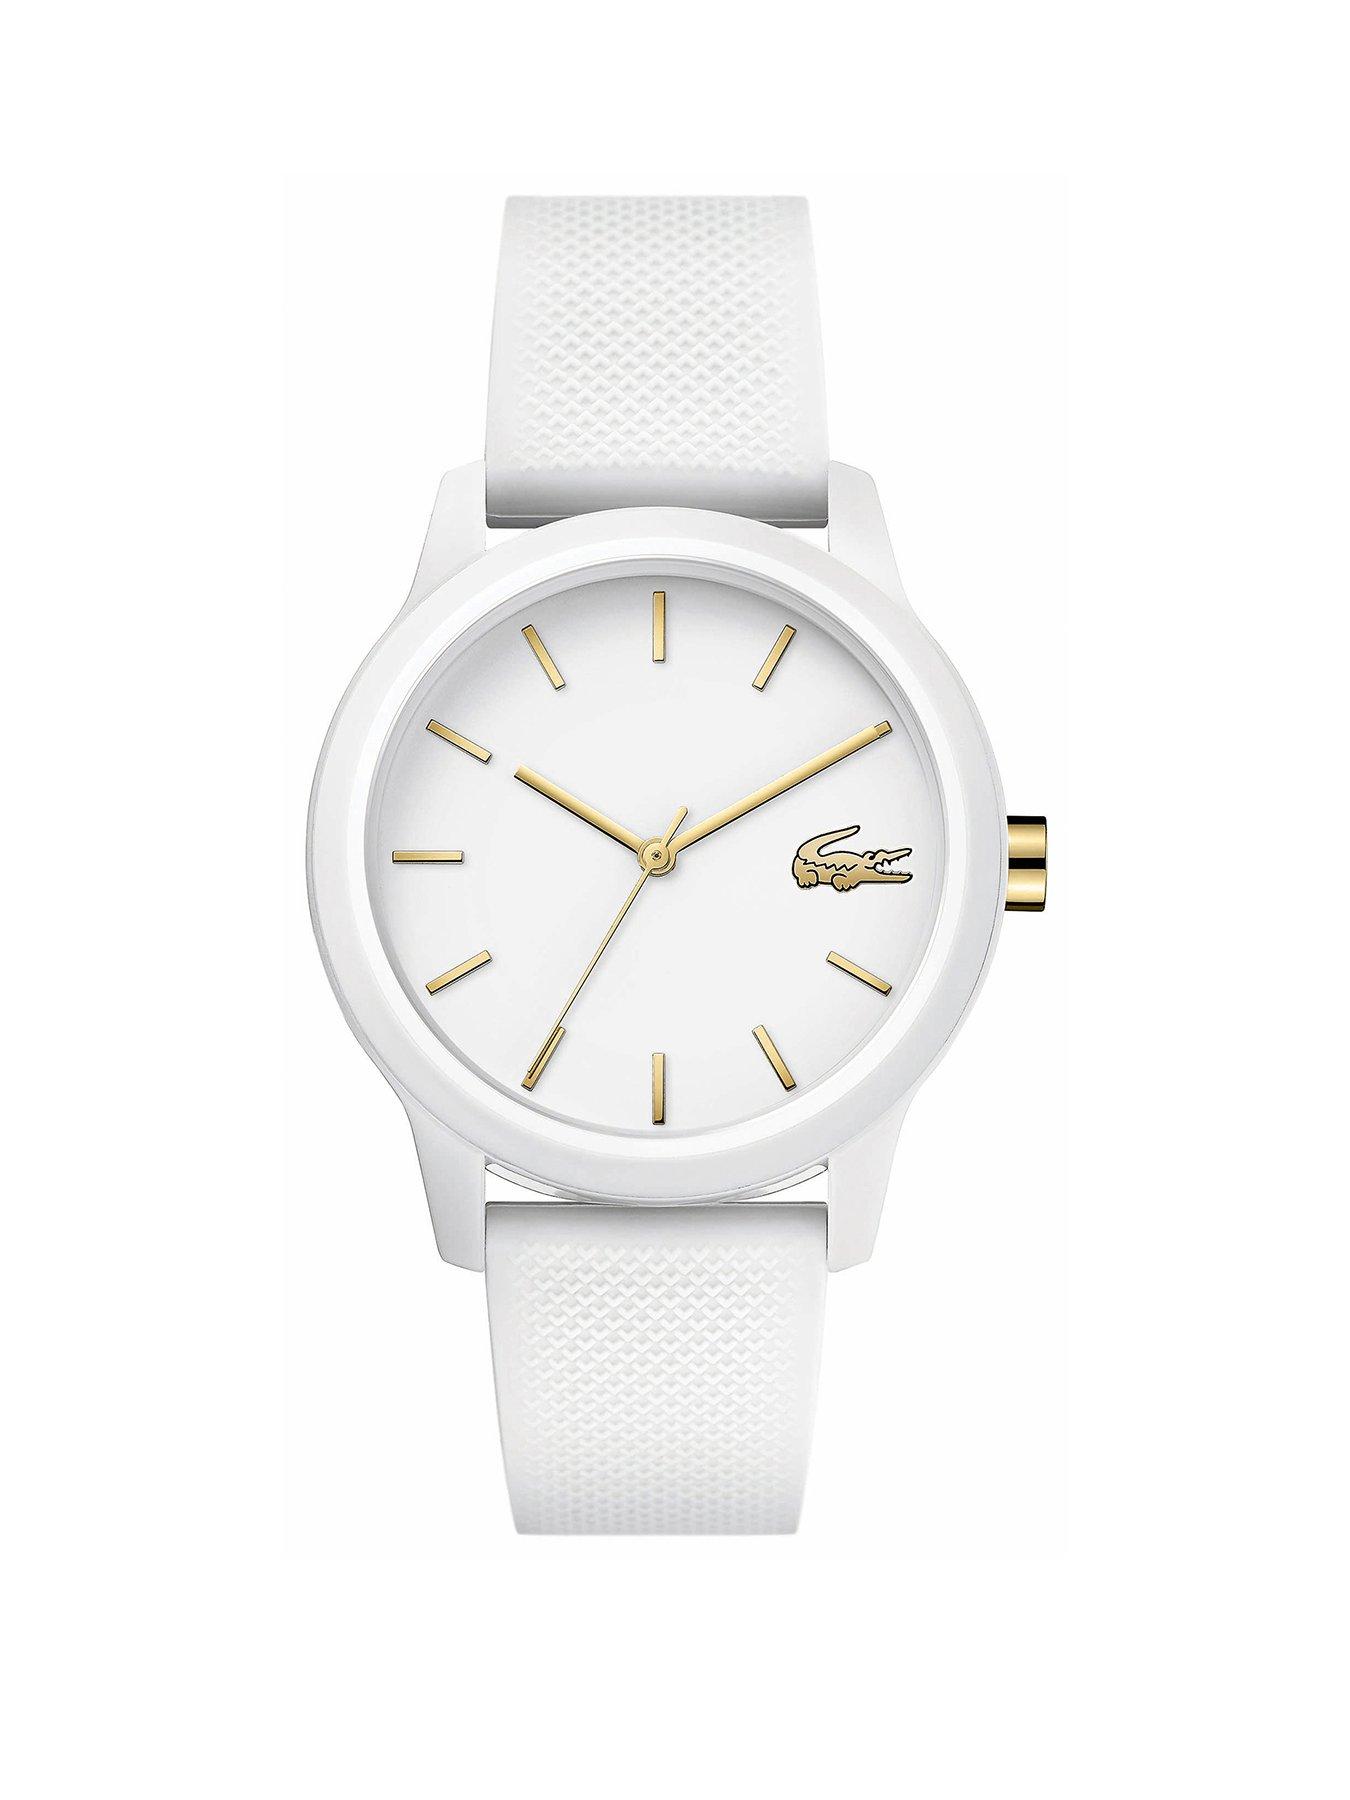 Lacoste 12.12 White Gold Dial White Silicone Strap Ladies Watch |